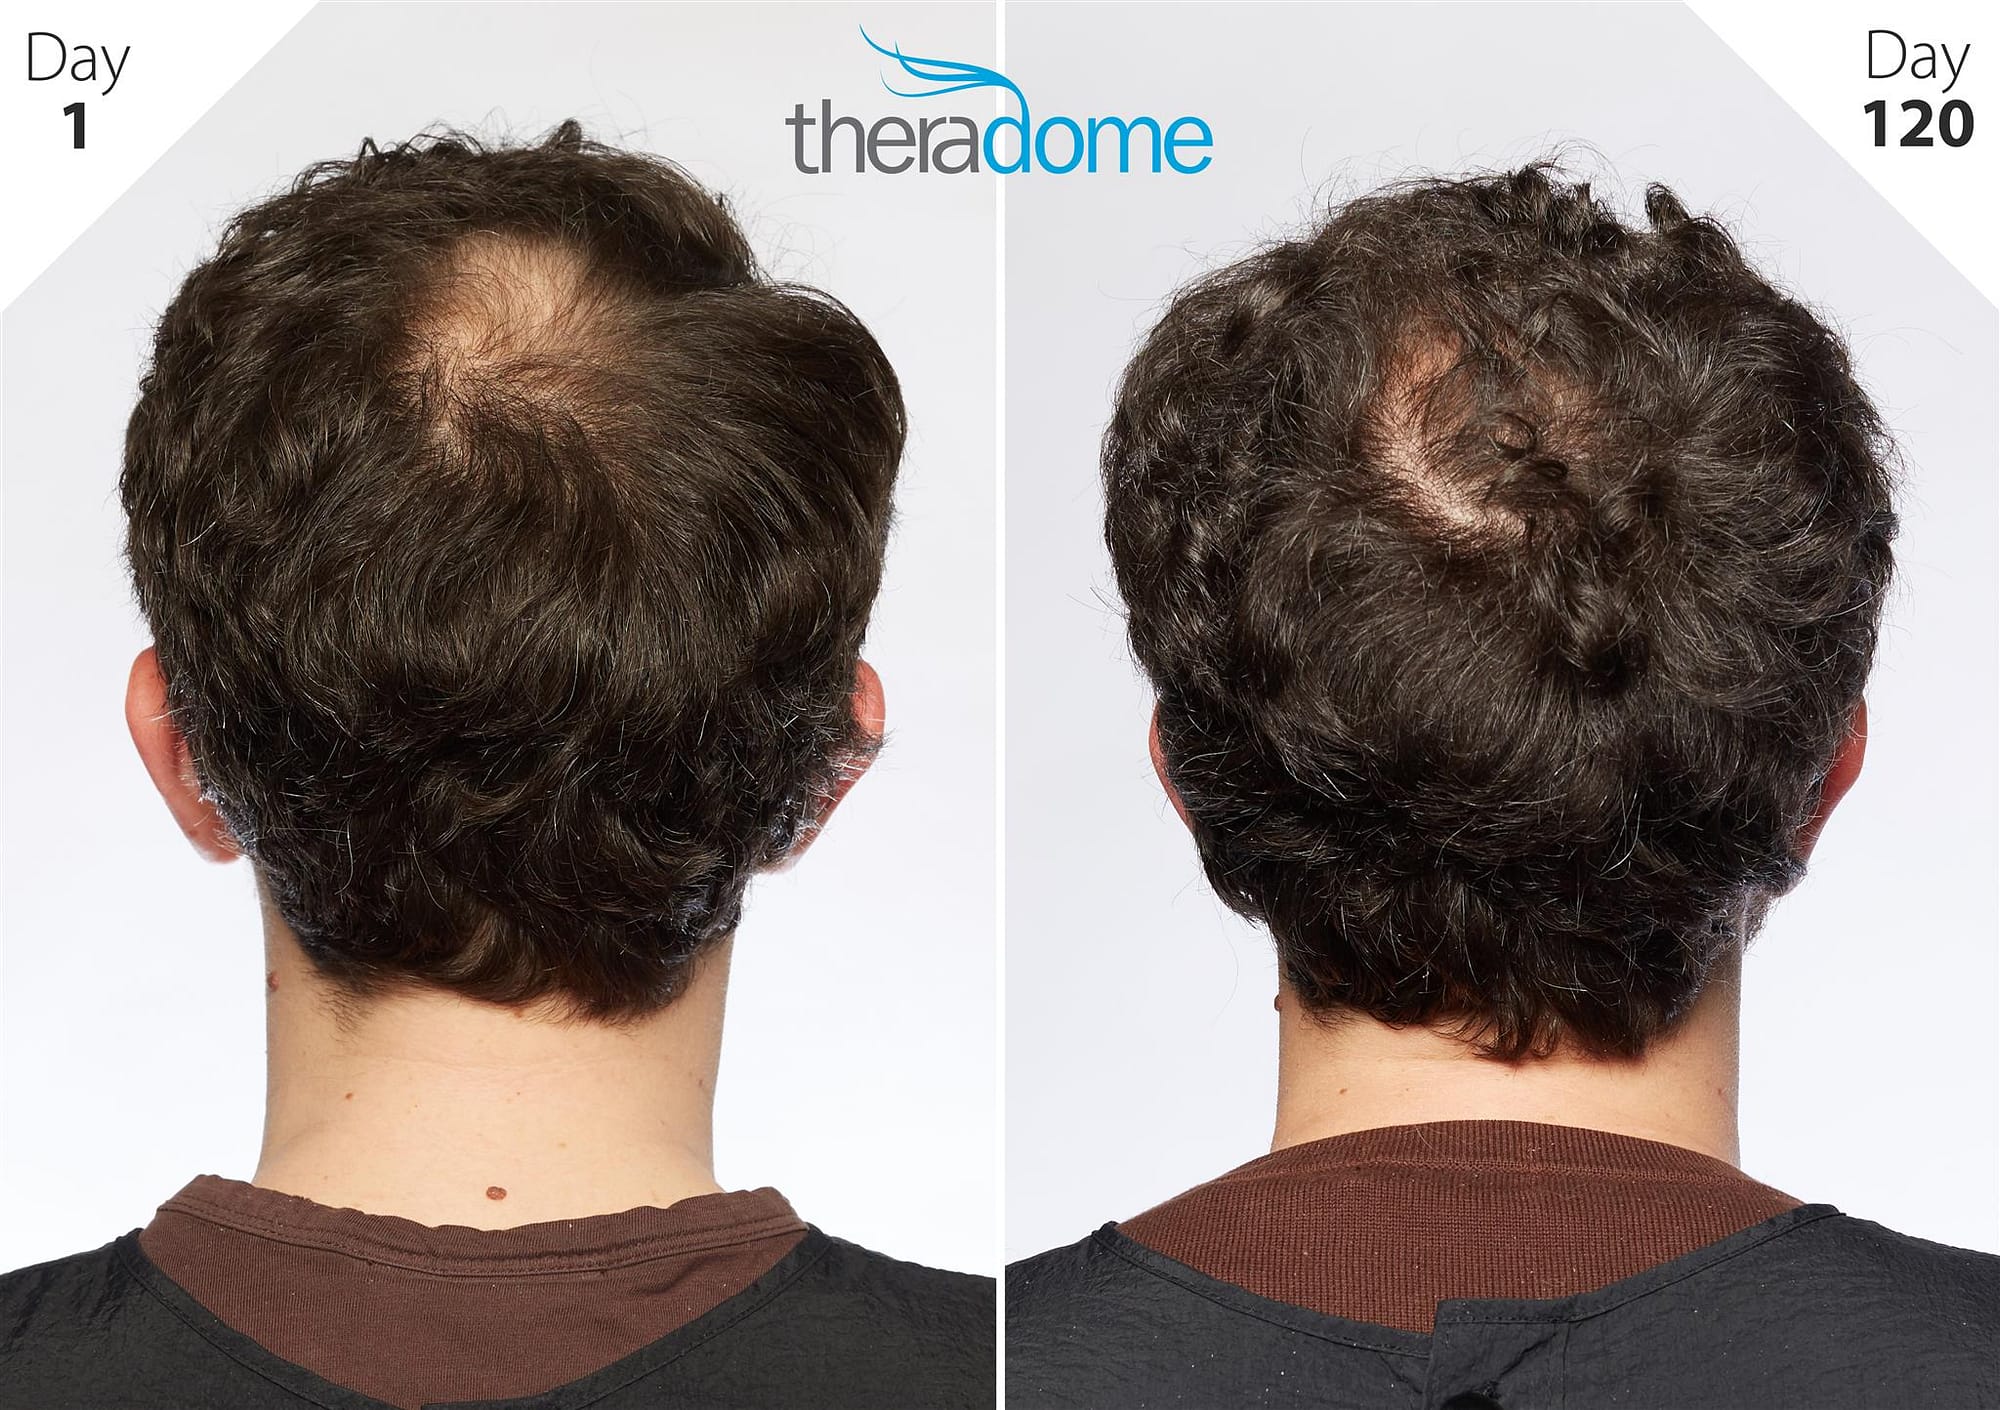 Experiencing Hair Loss? Try Theradome [Laser Therapy]